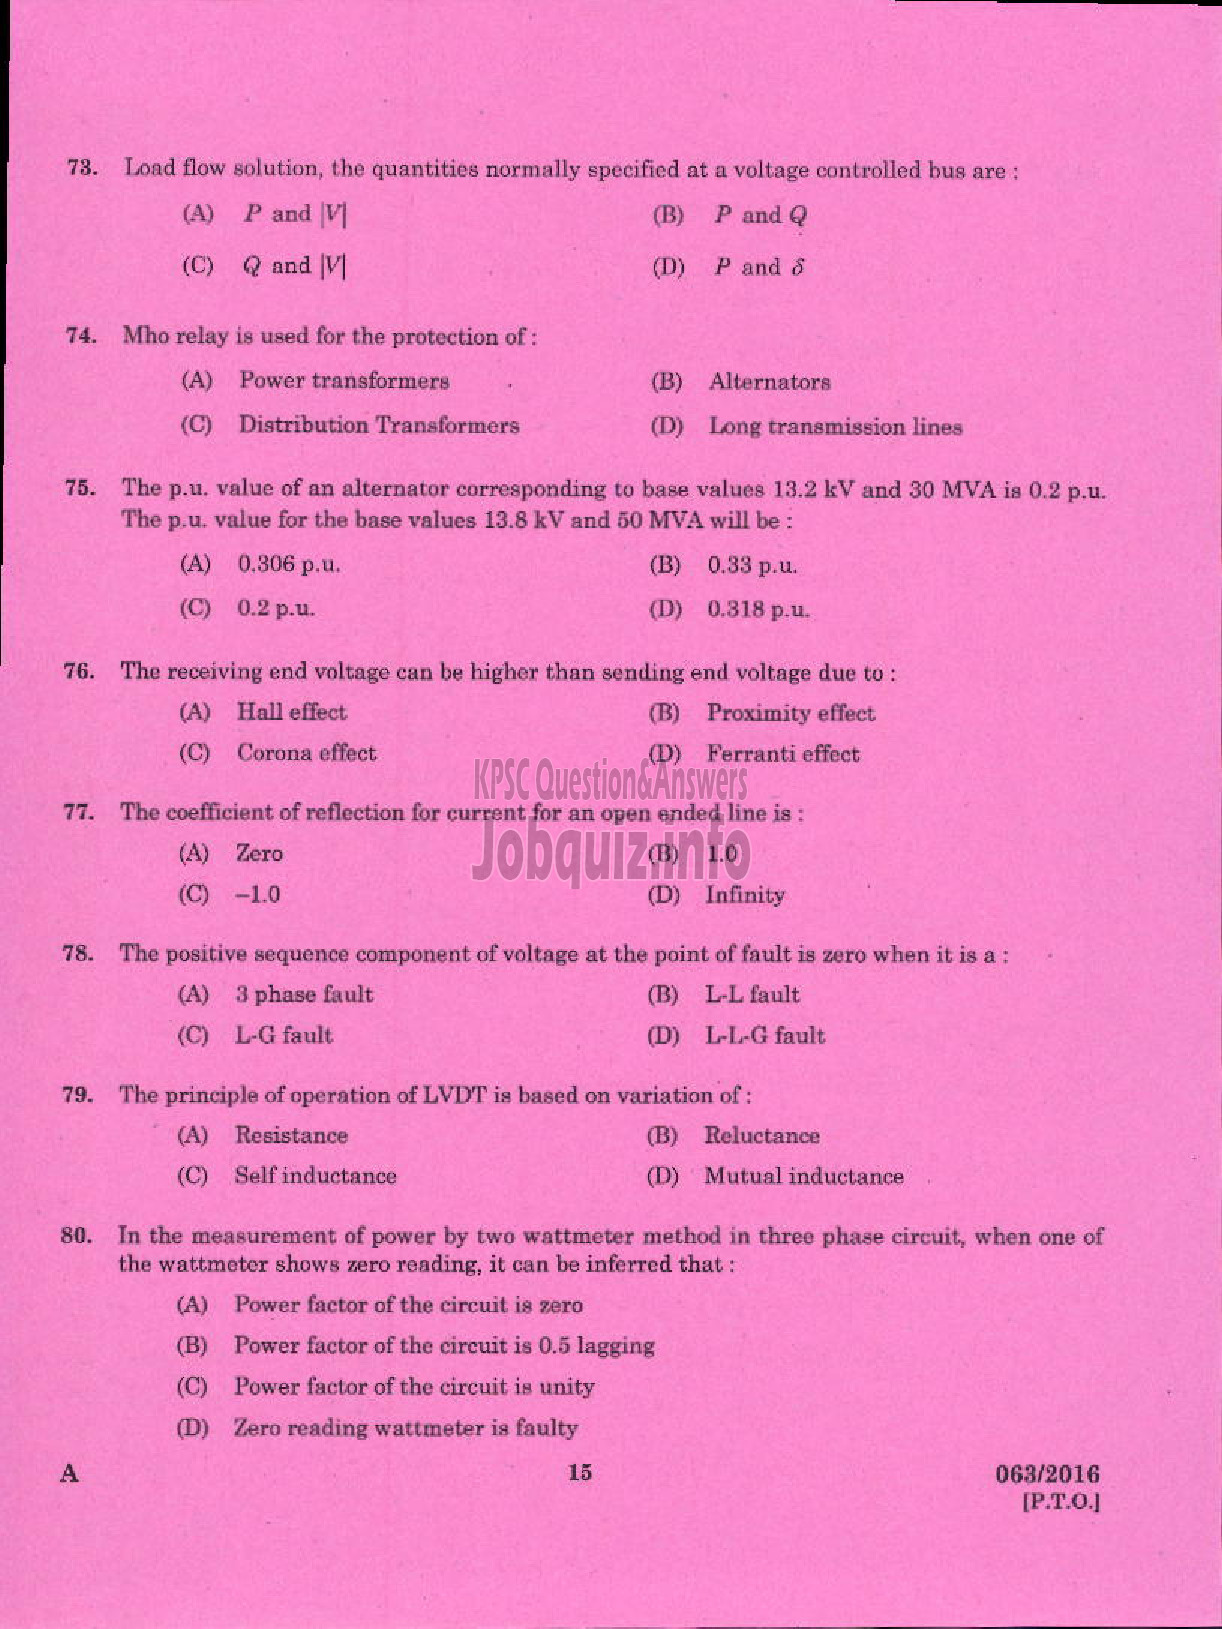 Kerala PSC Question Paper - ASSISTANT PROFESSOR IN ELECTRICAL AND ELECTRONICS ENGINEERING TECHNICAL EDUCATION ENGINEERING COLLEGES-13